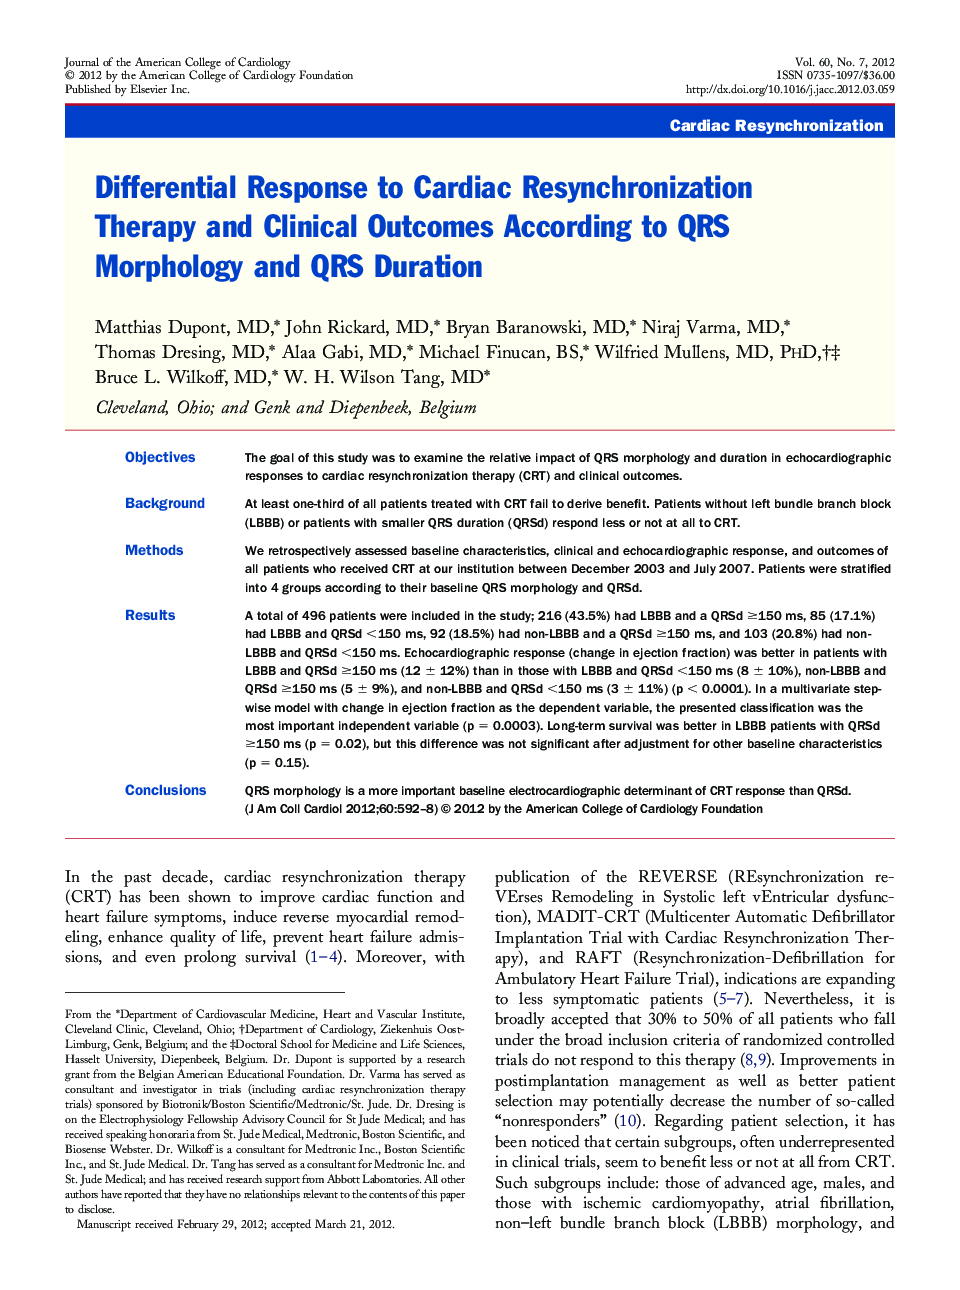 Differential Response to Cardiac Resynchronization Therapy and Clinical Outcomes According to QRS Morphology and QRS Duration 